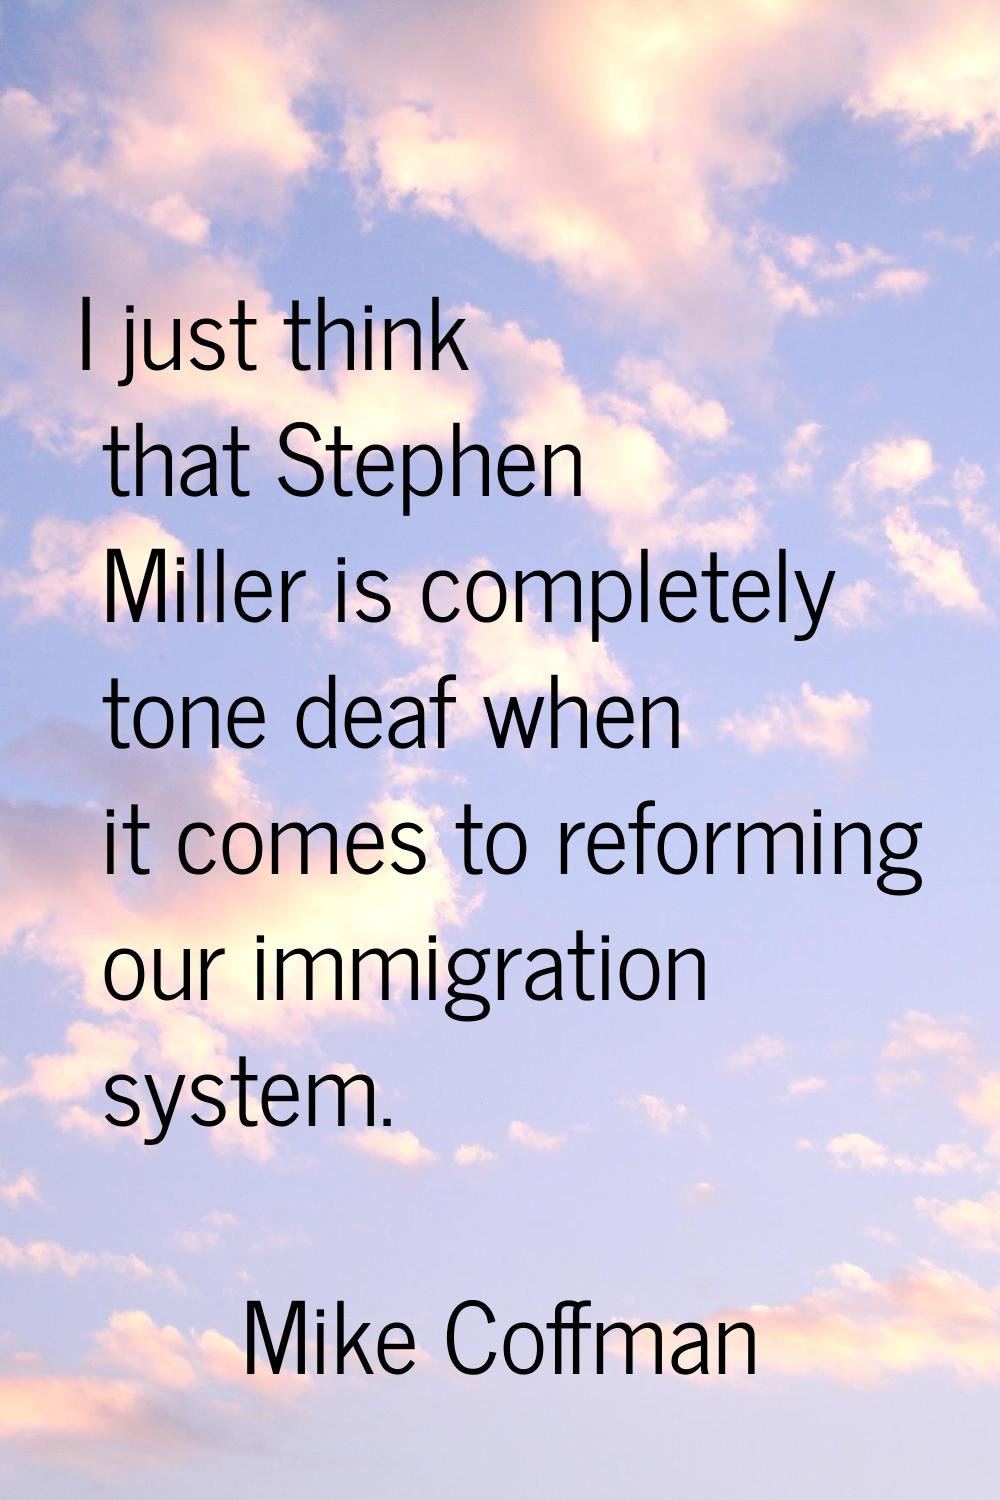 I just think that Stephen Miller is completely tone deaf when it comes to reforming our immigration